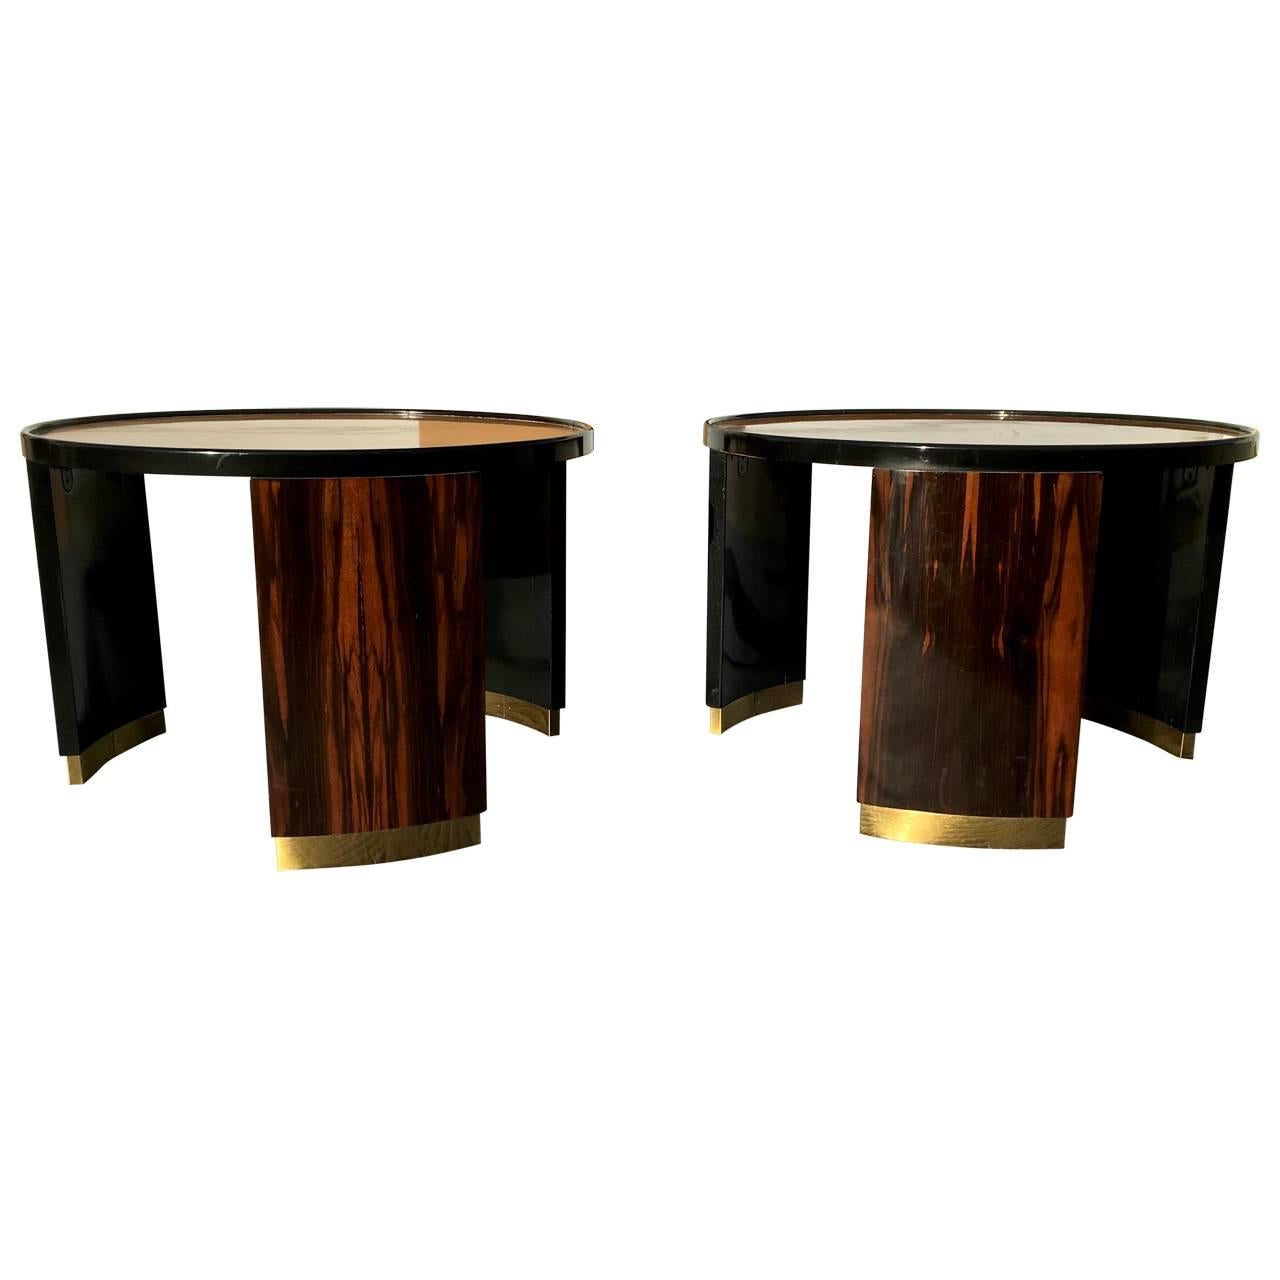 American Pair of Round Mastercraft Occasional Side Tables